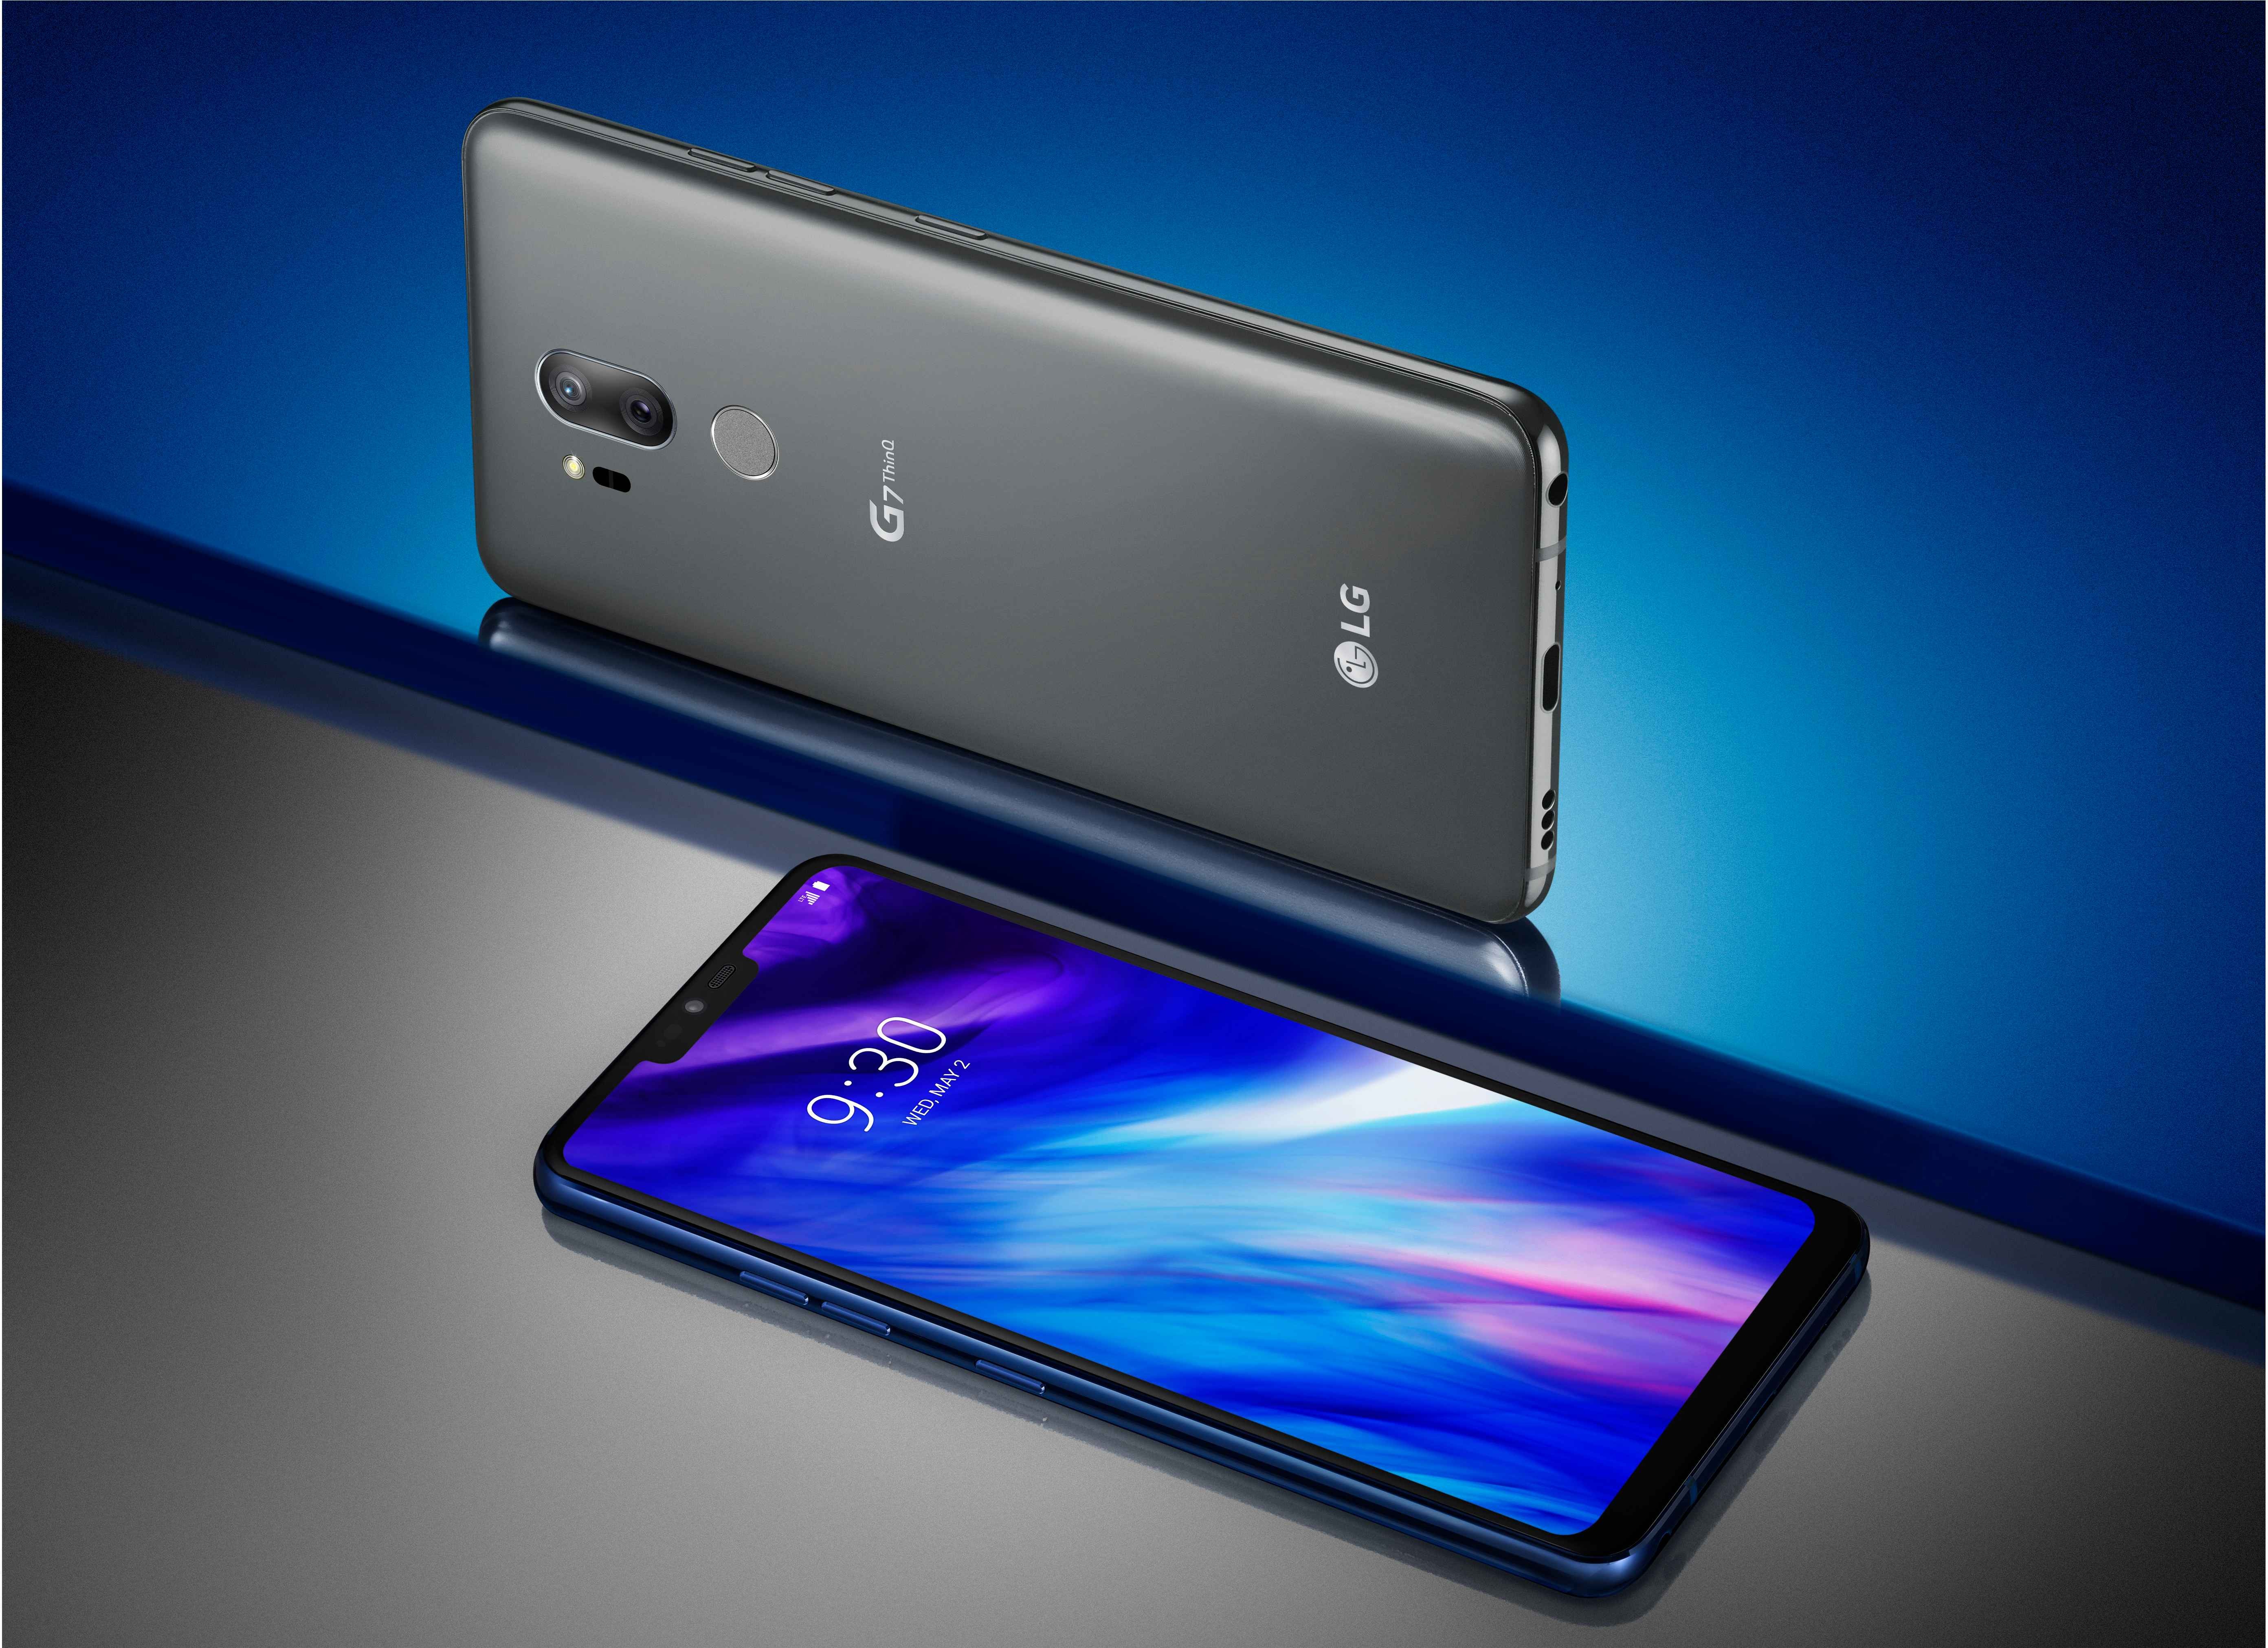 The front and rear view of the LG G7 ThinQ in New Platinum Gray against a gray and blue background